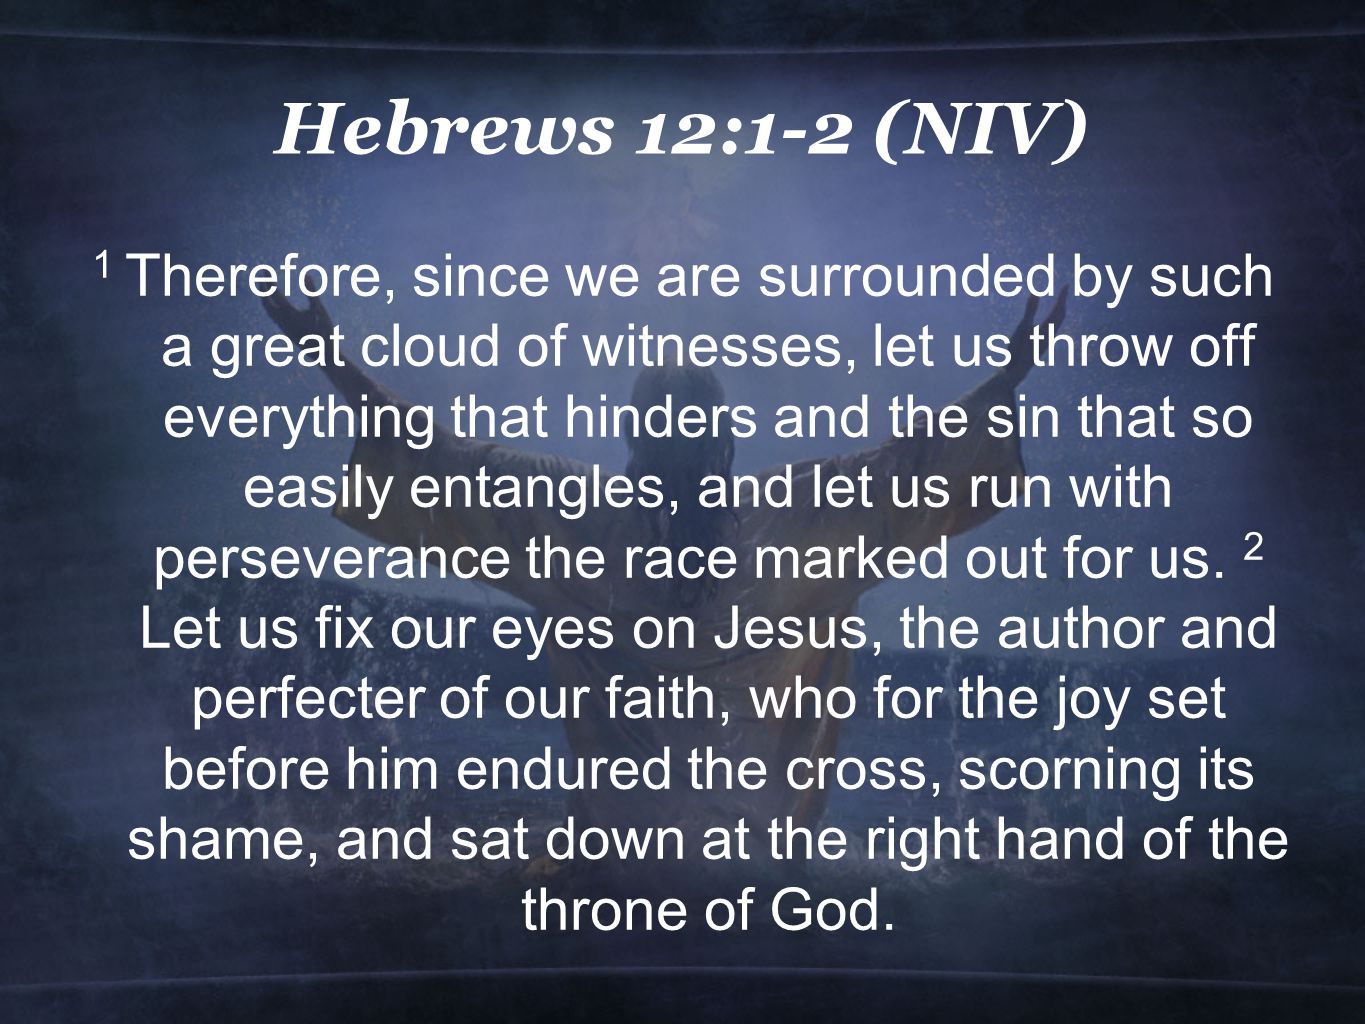 Hebrews 12:1-2 (NIV) 1 Therefore, since we are surrounded by such a great cloud of witnesses, let us throw off everything that hinders and the sin that so easily entangles, and let us run with perseverance the race marked out for us.